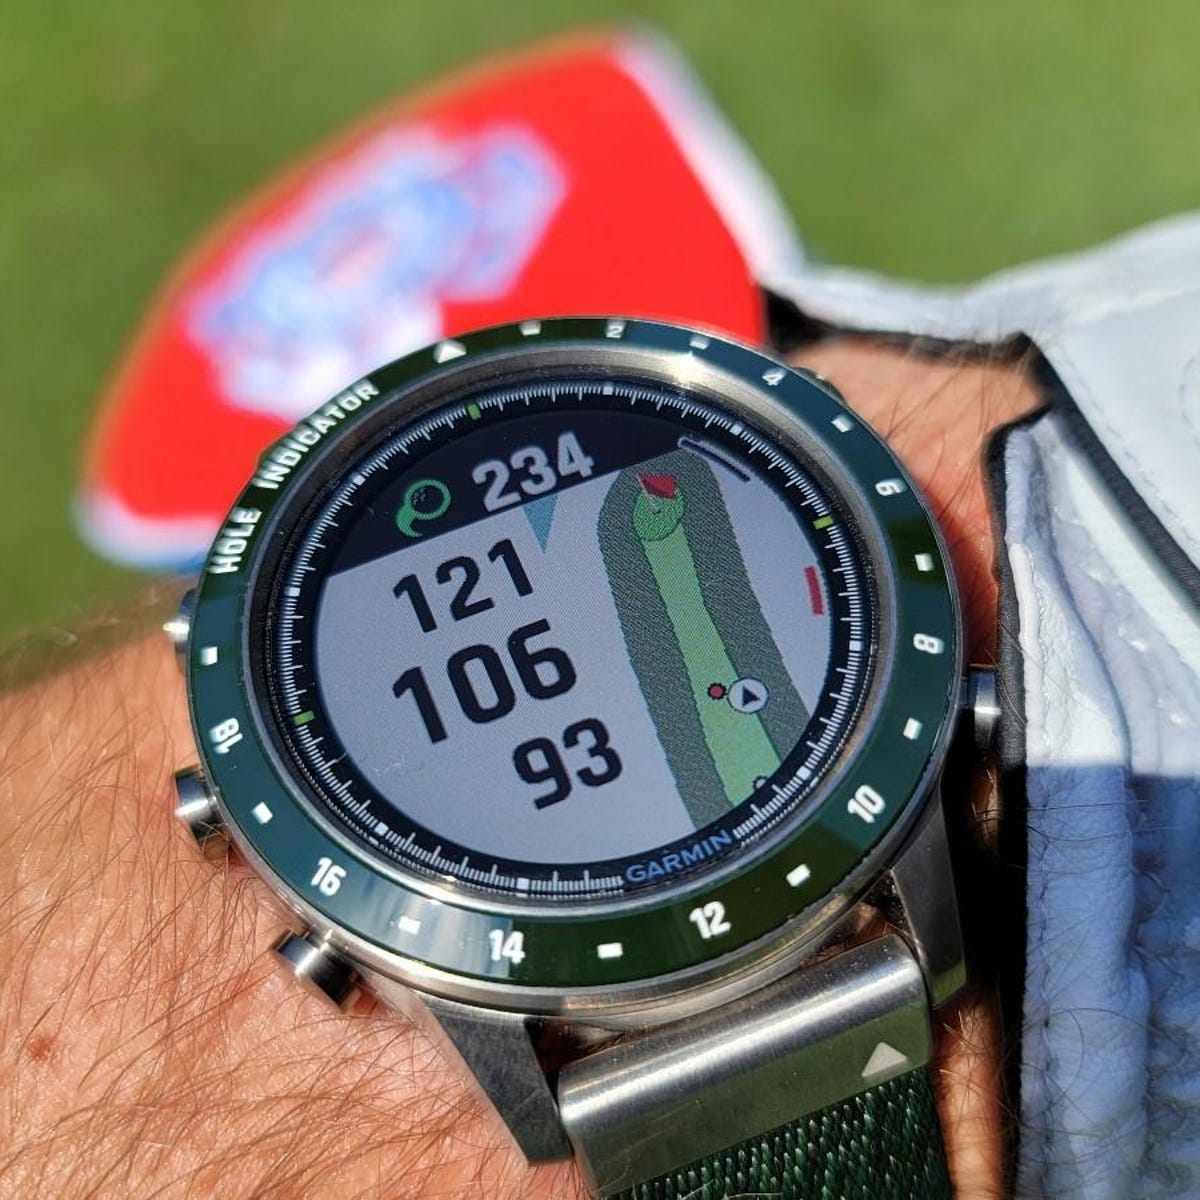 Garmin Approach S12 Watch Review - Plugged In Golf